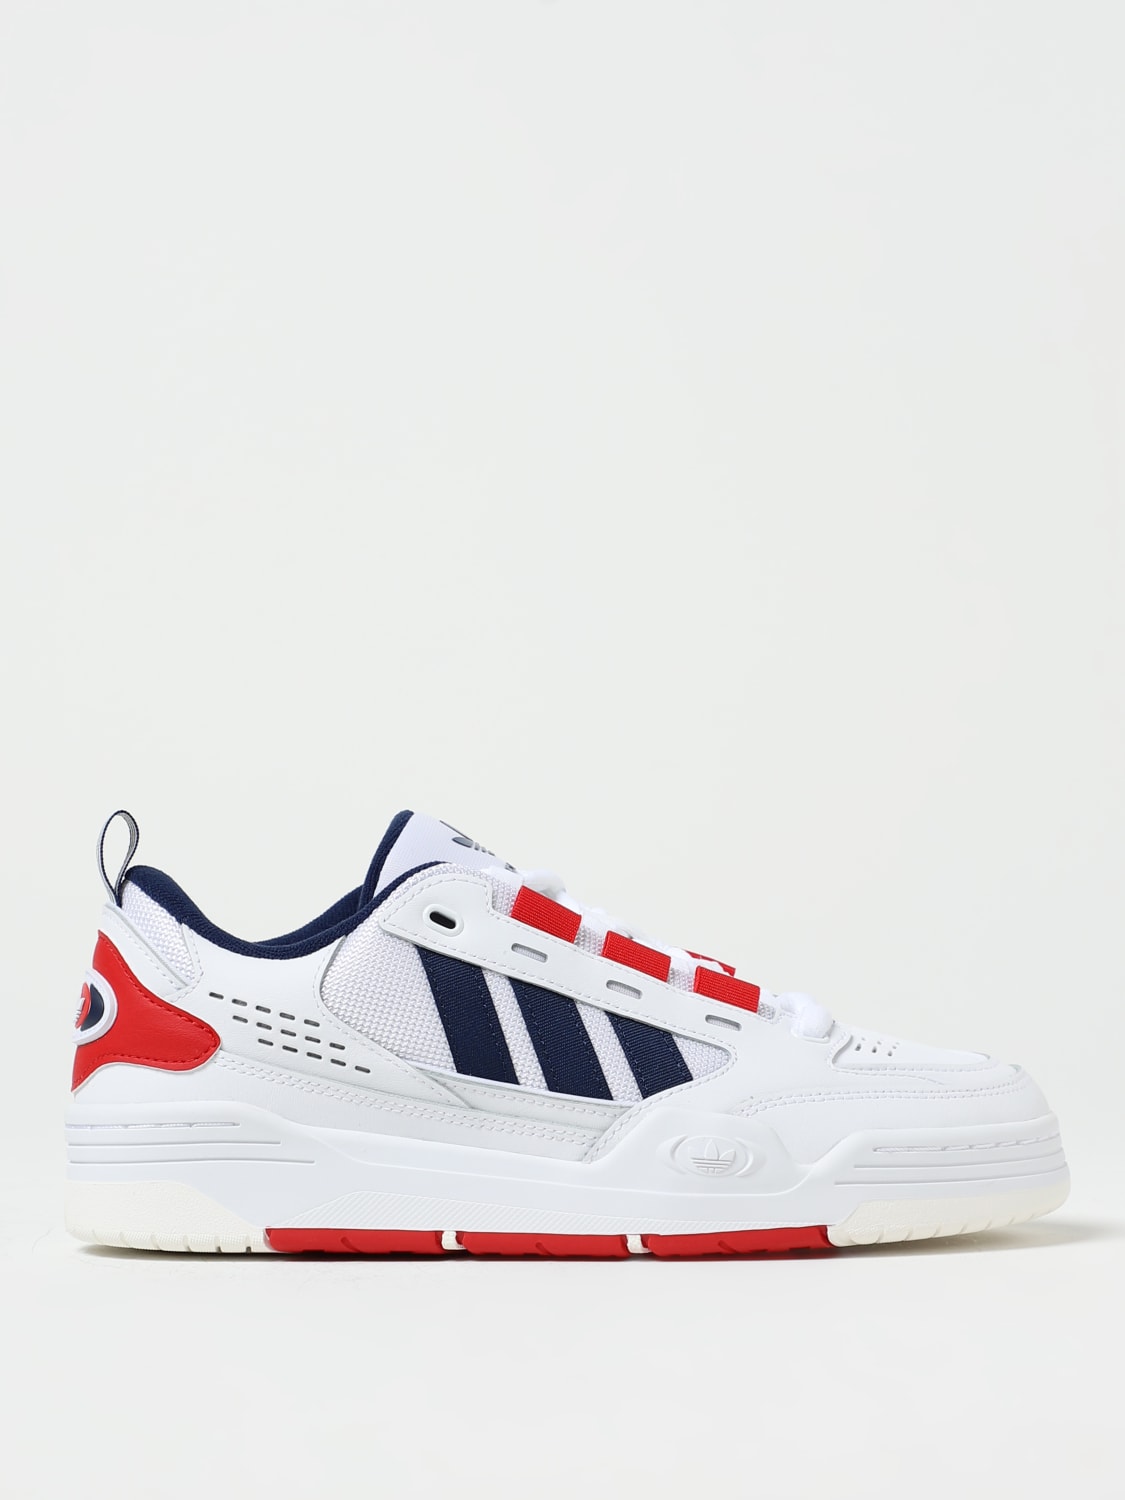 mesh Originals sneakers ID2103 ORIGINALS: ADI2000 online and - | White ADIDAS leather at Adidas in sneakers